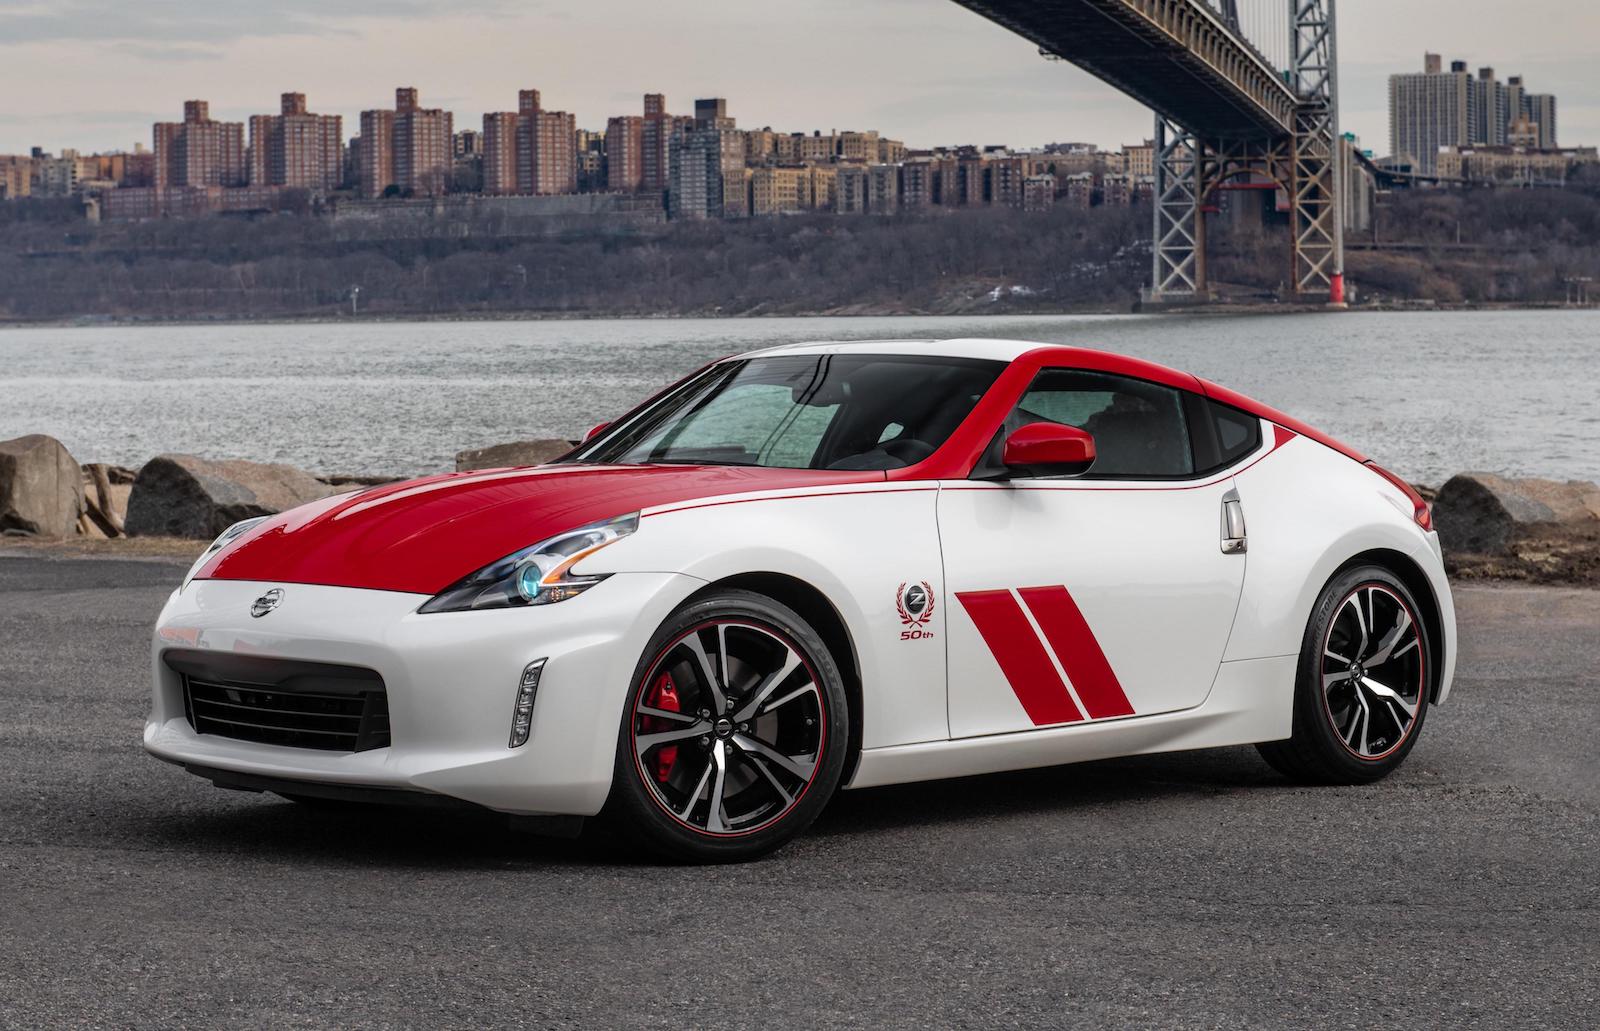 2020 Nissan 370Z 50th Anniversary Edition revealed